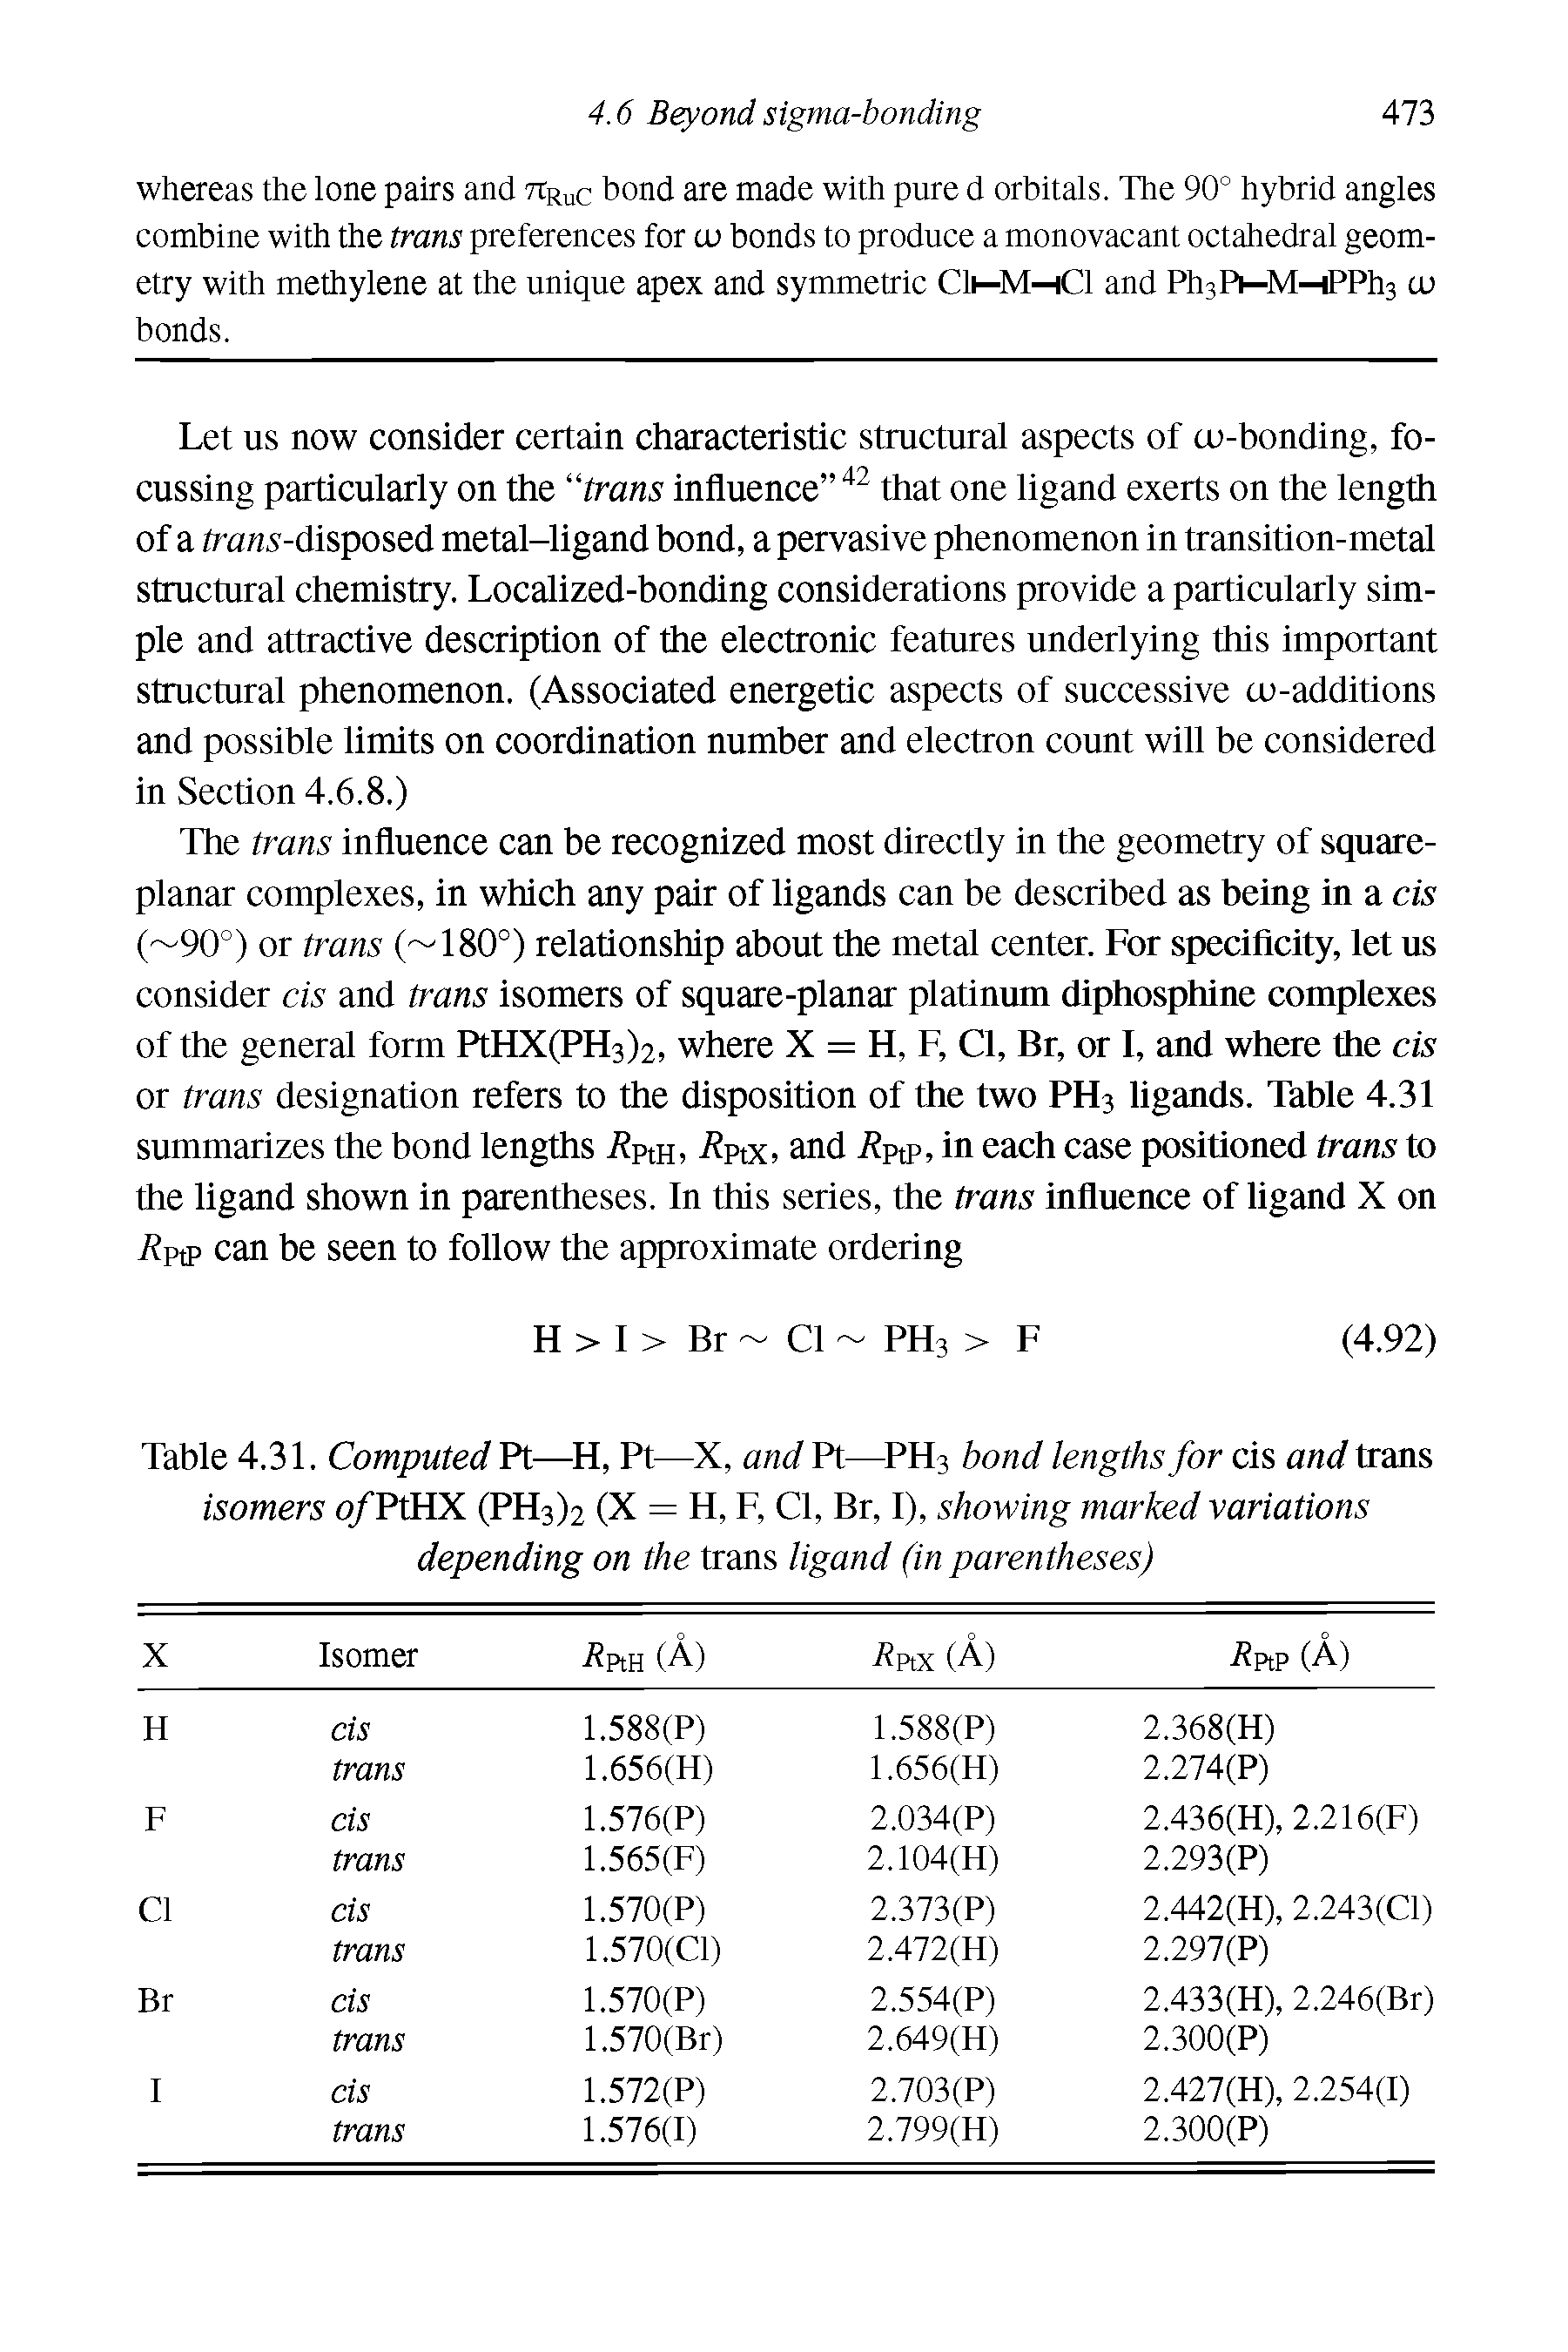 Table 4.31. Computed Pt—H, Pt—X, and Pt—PIT bond lengths for cis and trans isomers o/PtHX (PH3)2 (X = H, F, Cl, Br, I), showing marked variations depending on the trans ligand (in parentheses)...